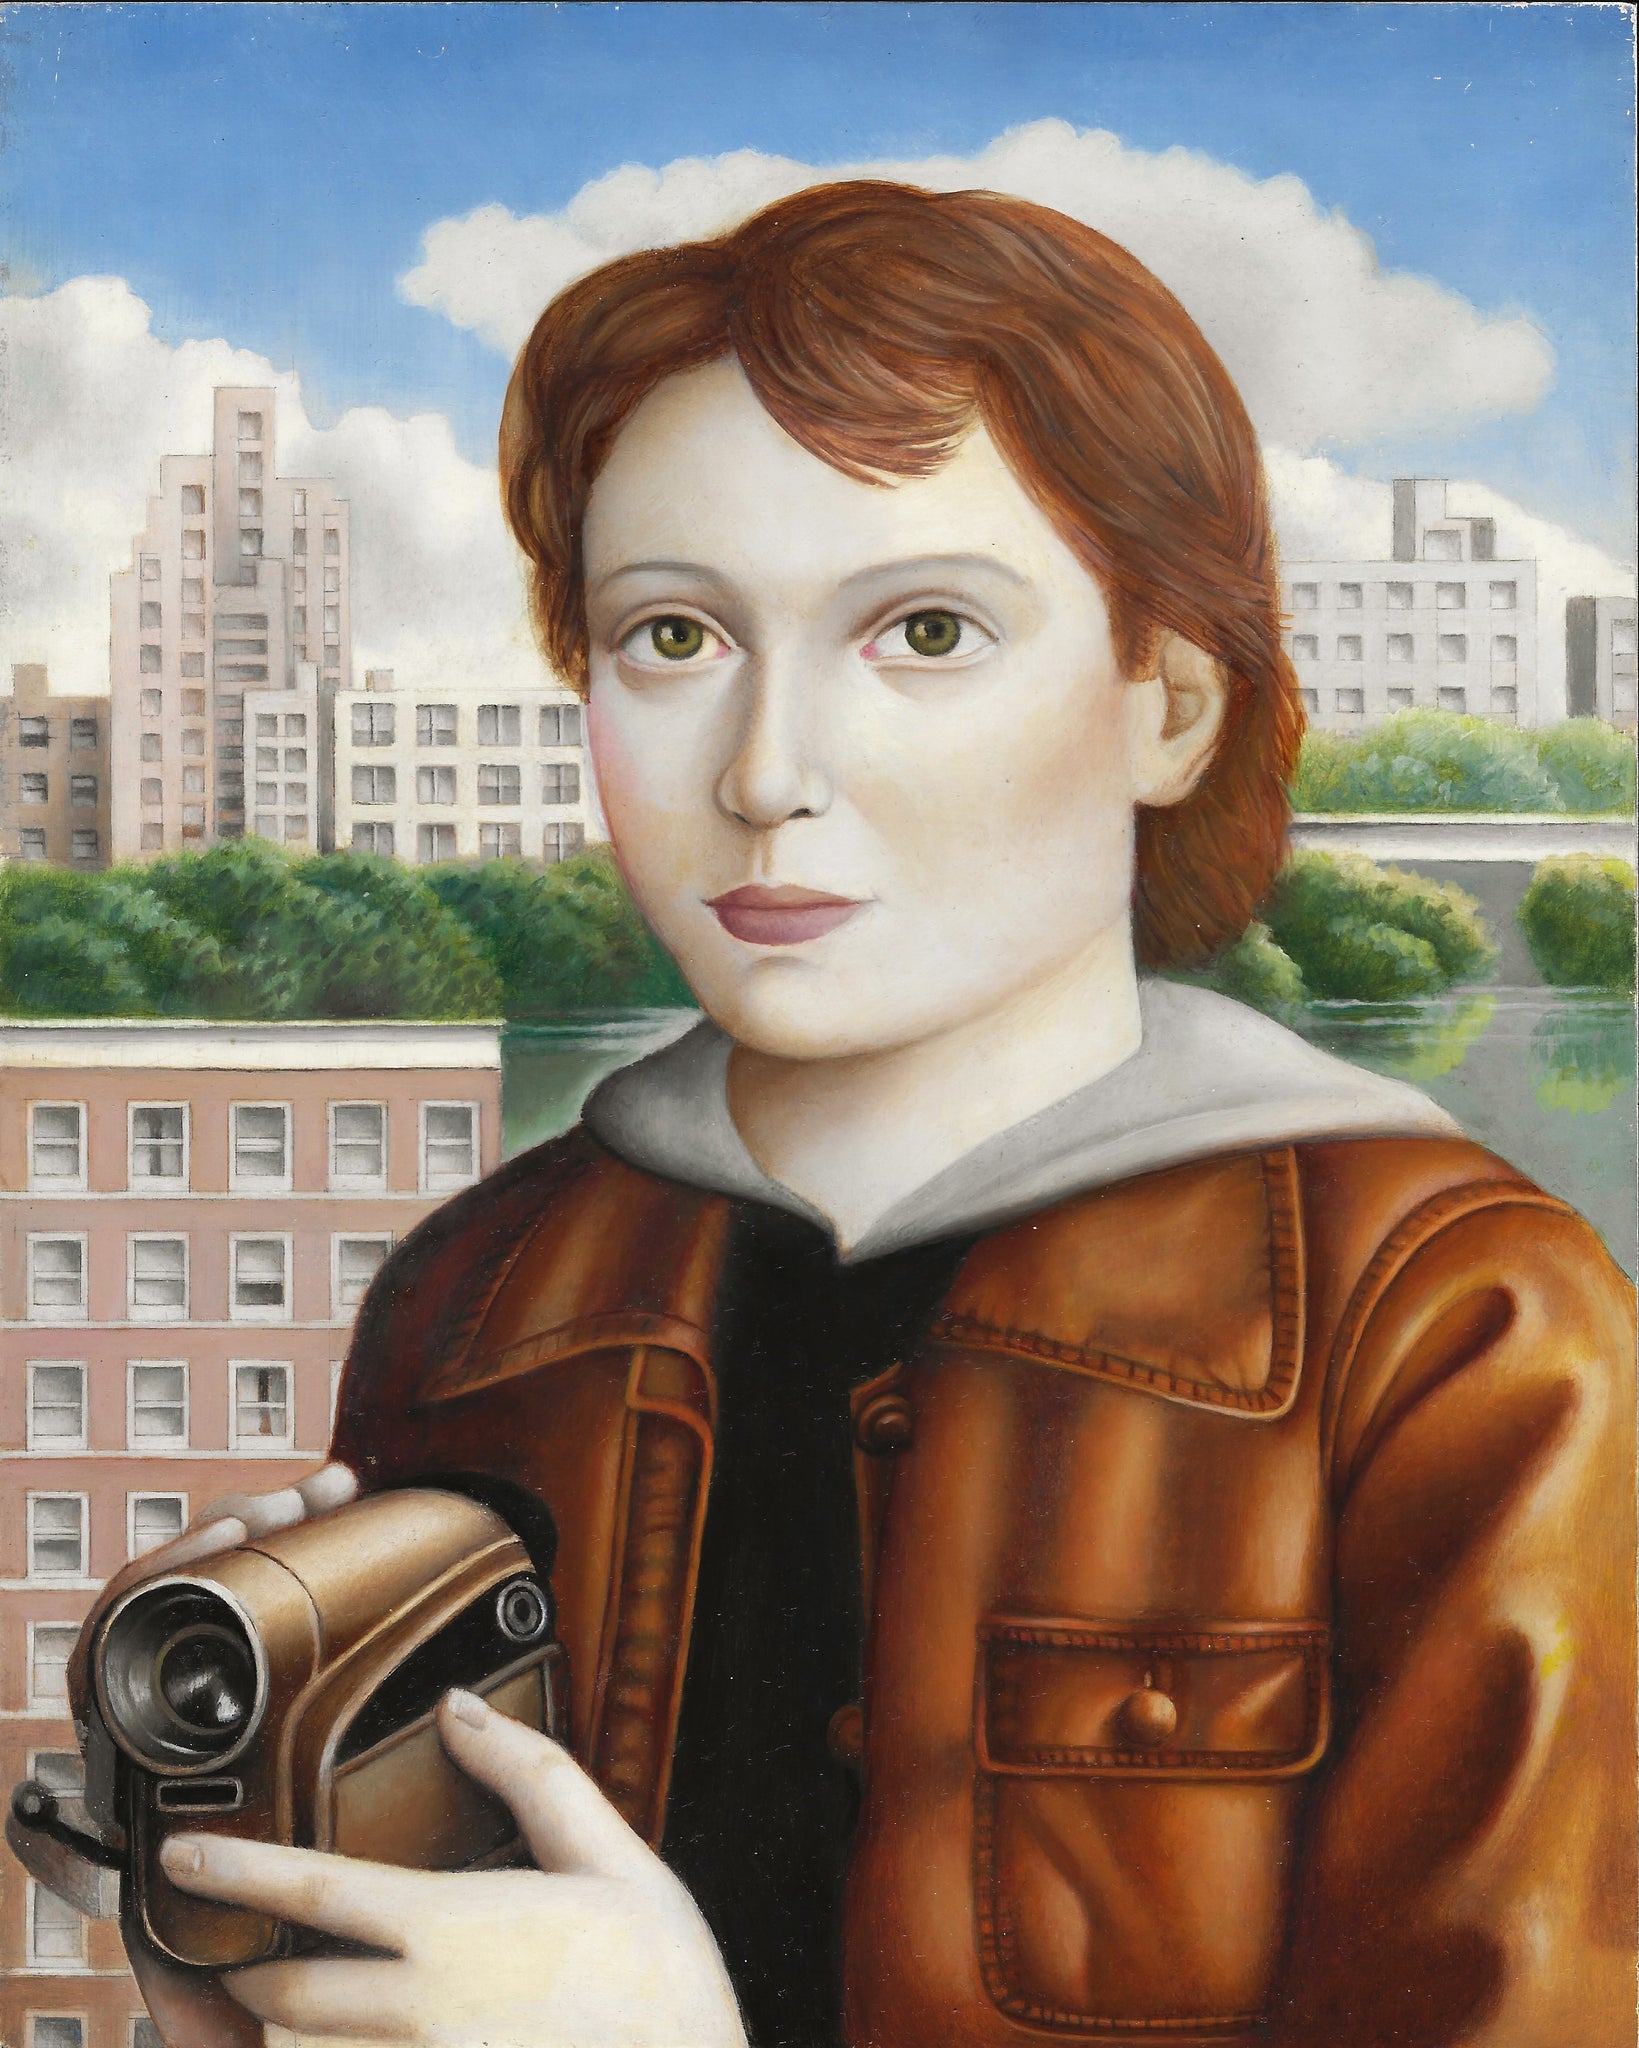 Amy Hill, "Man with Camera" SOLD